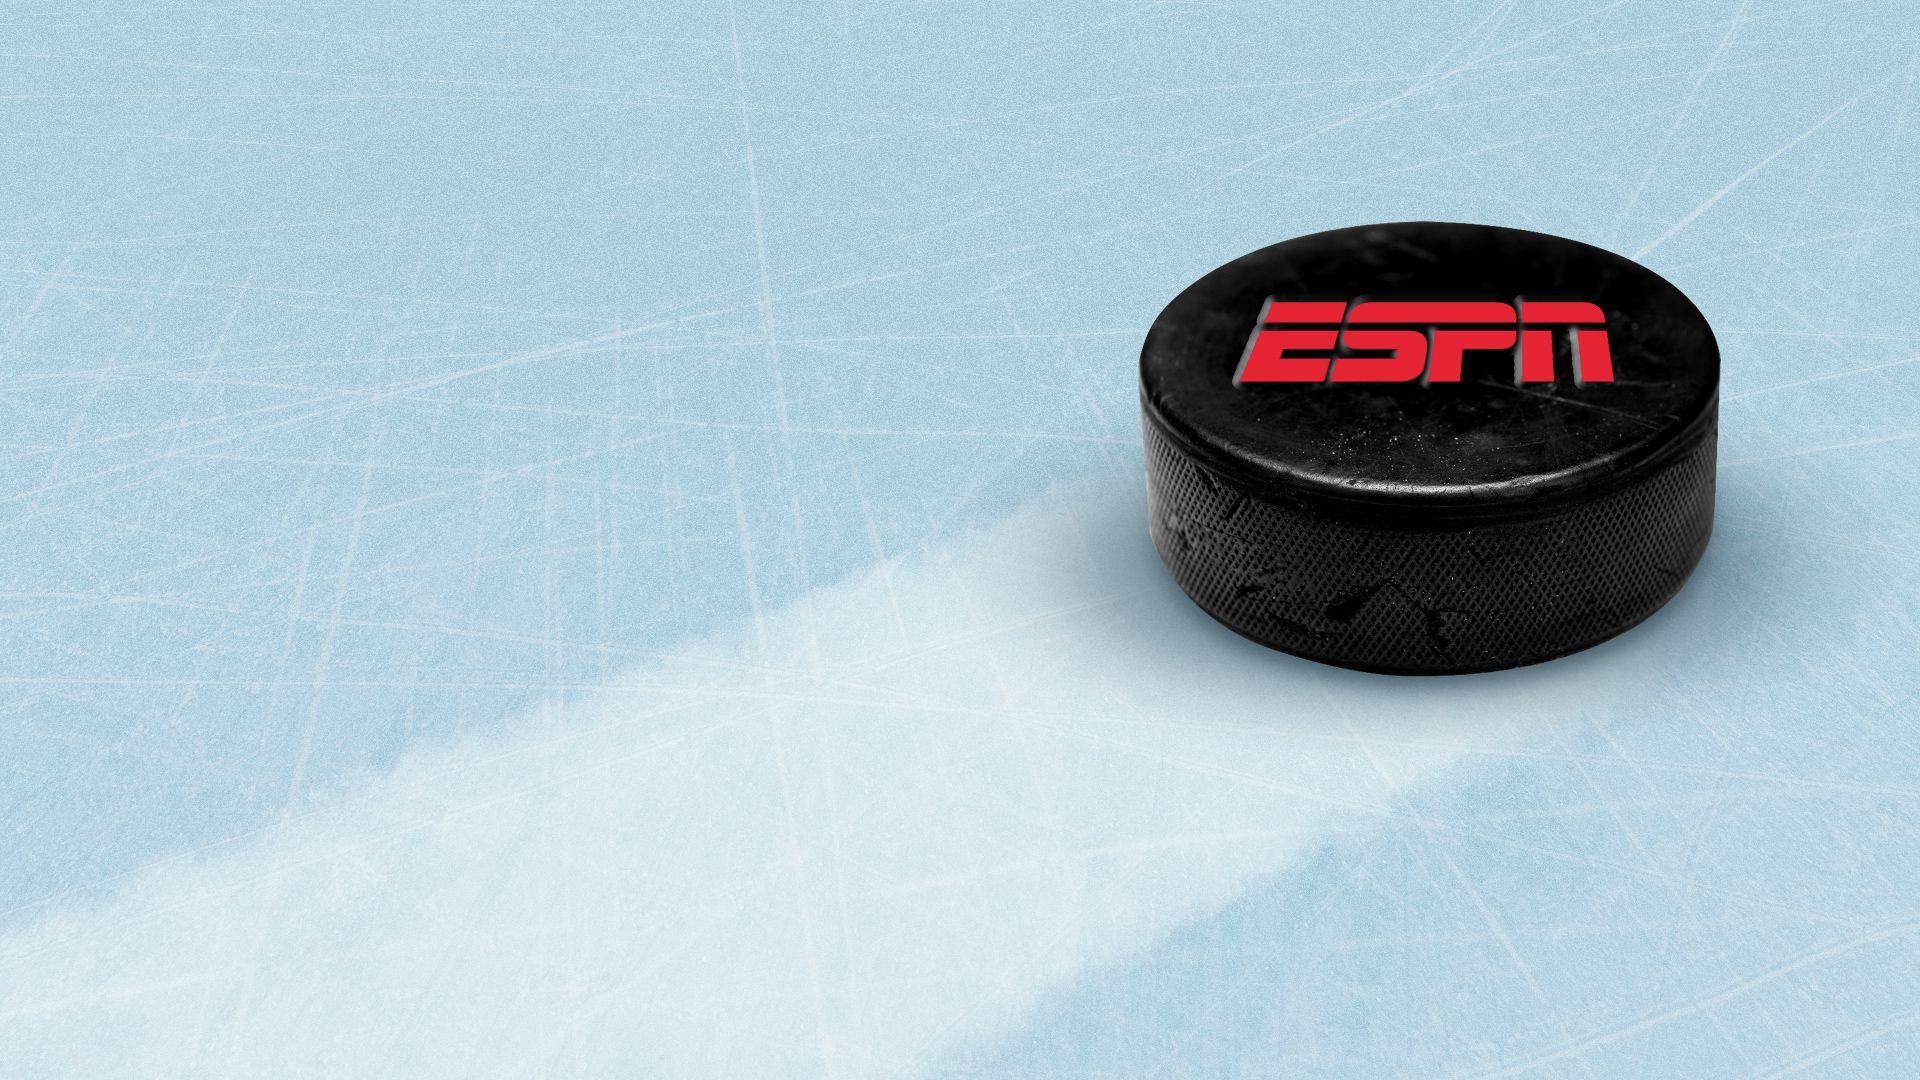 Illustration of a hockey puck with the ESPN logo on it sliding across the ice.   